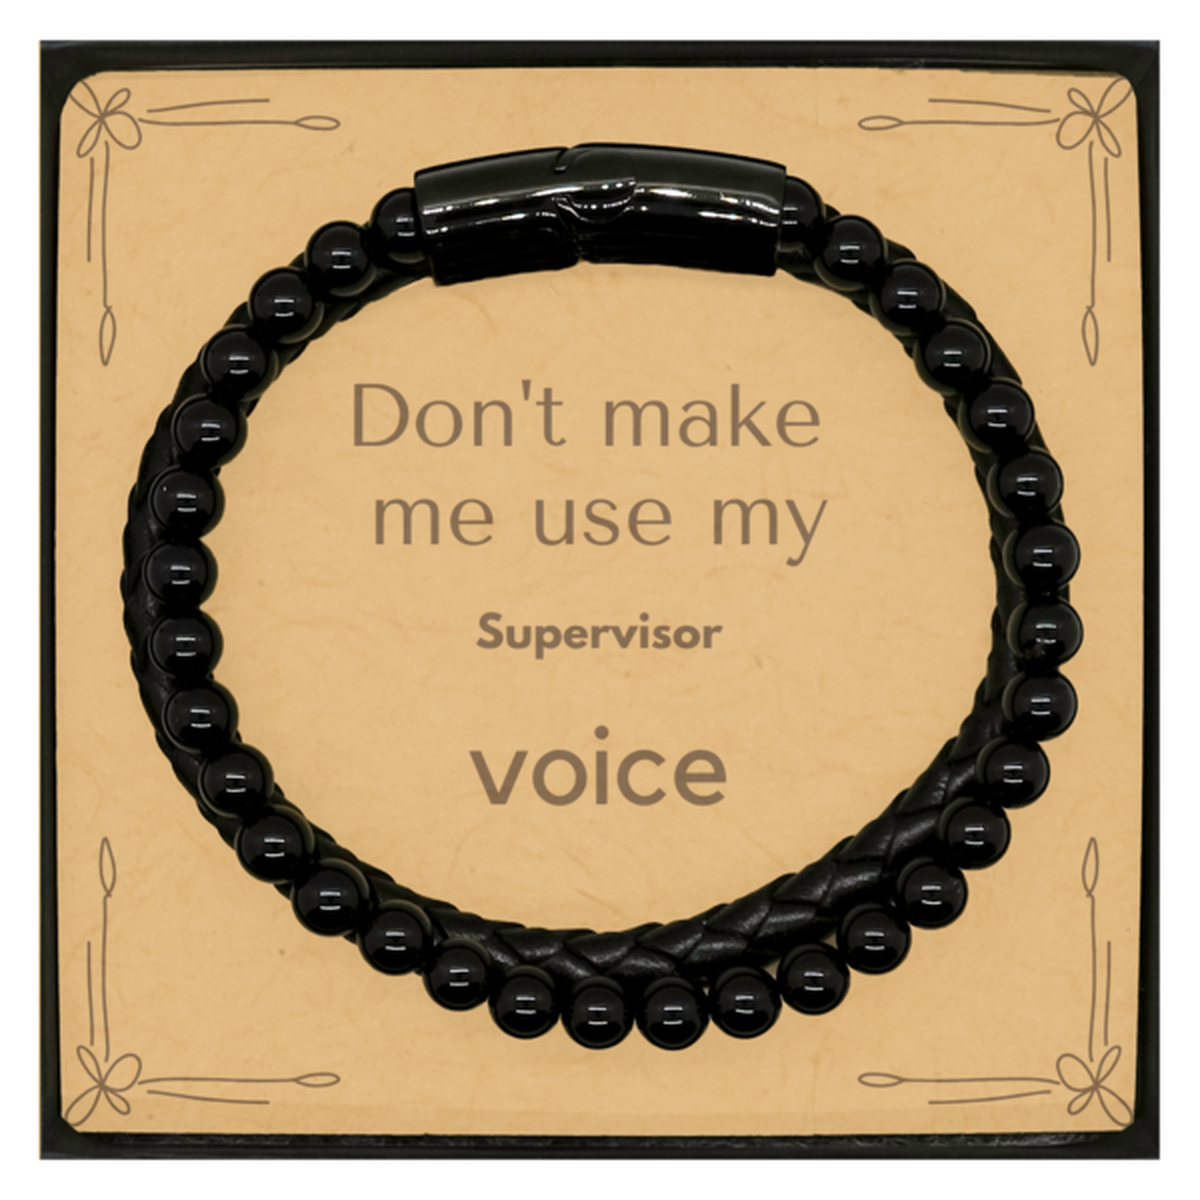 Don't make me use my Supervisor voice, Sarcasm Supervisor Card Gifts, Christmas Supervisor Stone Leather Bracelets Birthday Unique Gifts For Supervisor Coworkers, Men, Women, Colleague, Friends